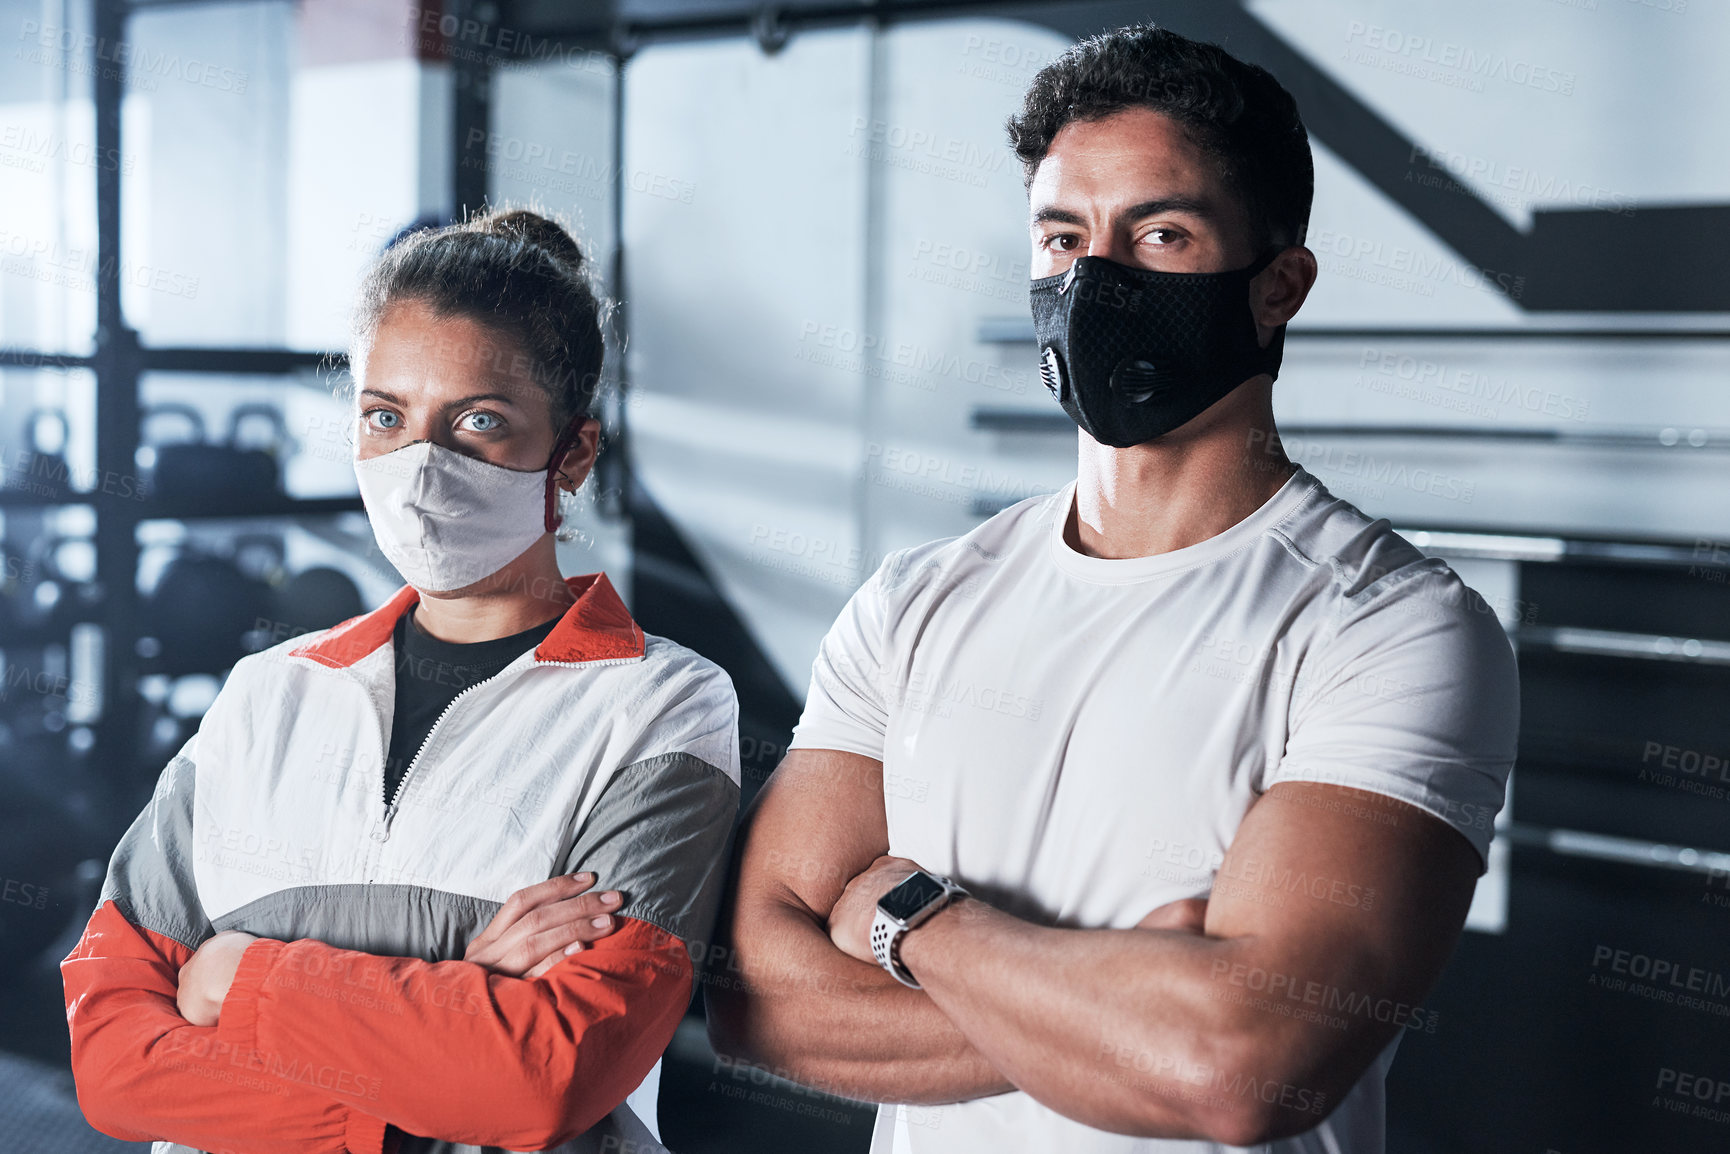 Buy stock photo Portrait of two sporty young people wearing face masks in a gym